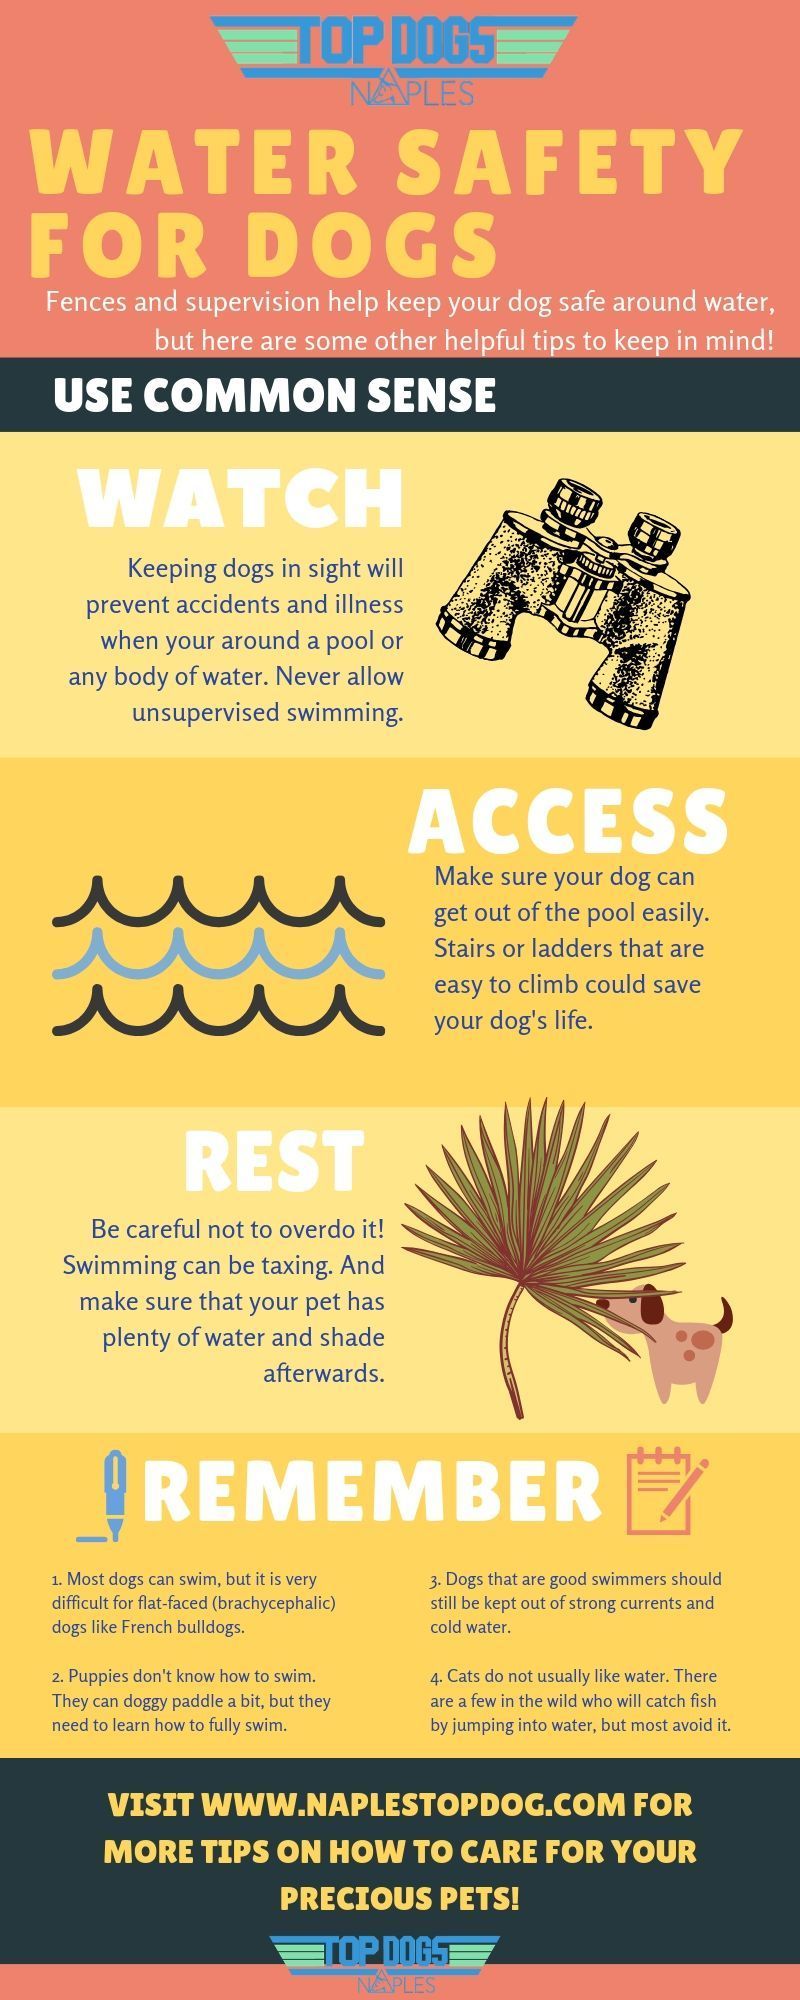 Dog Safety in Water Info Graphic